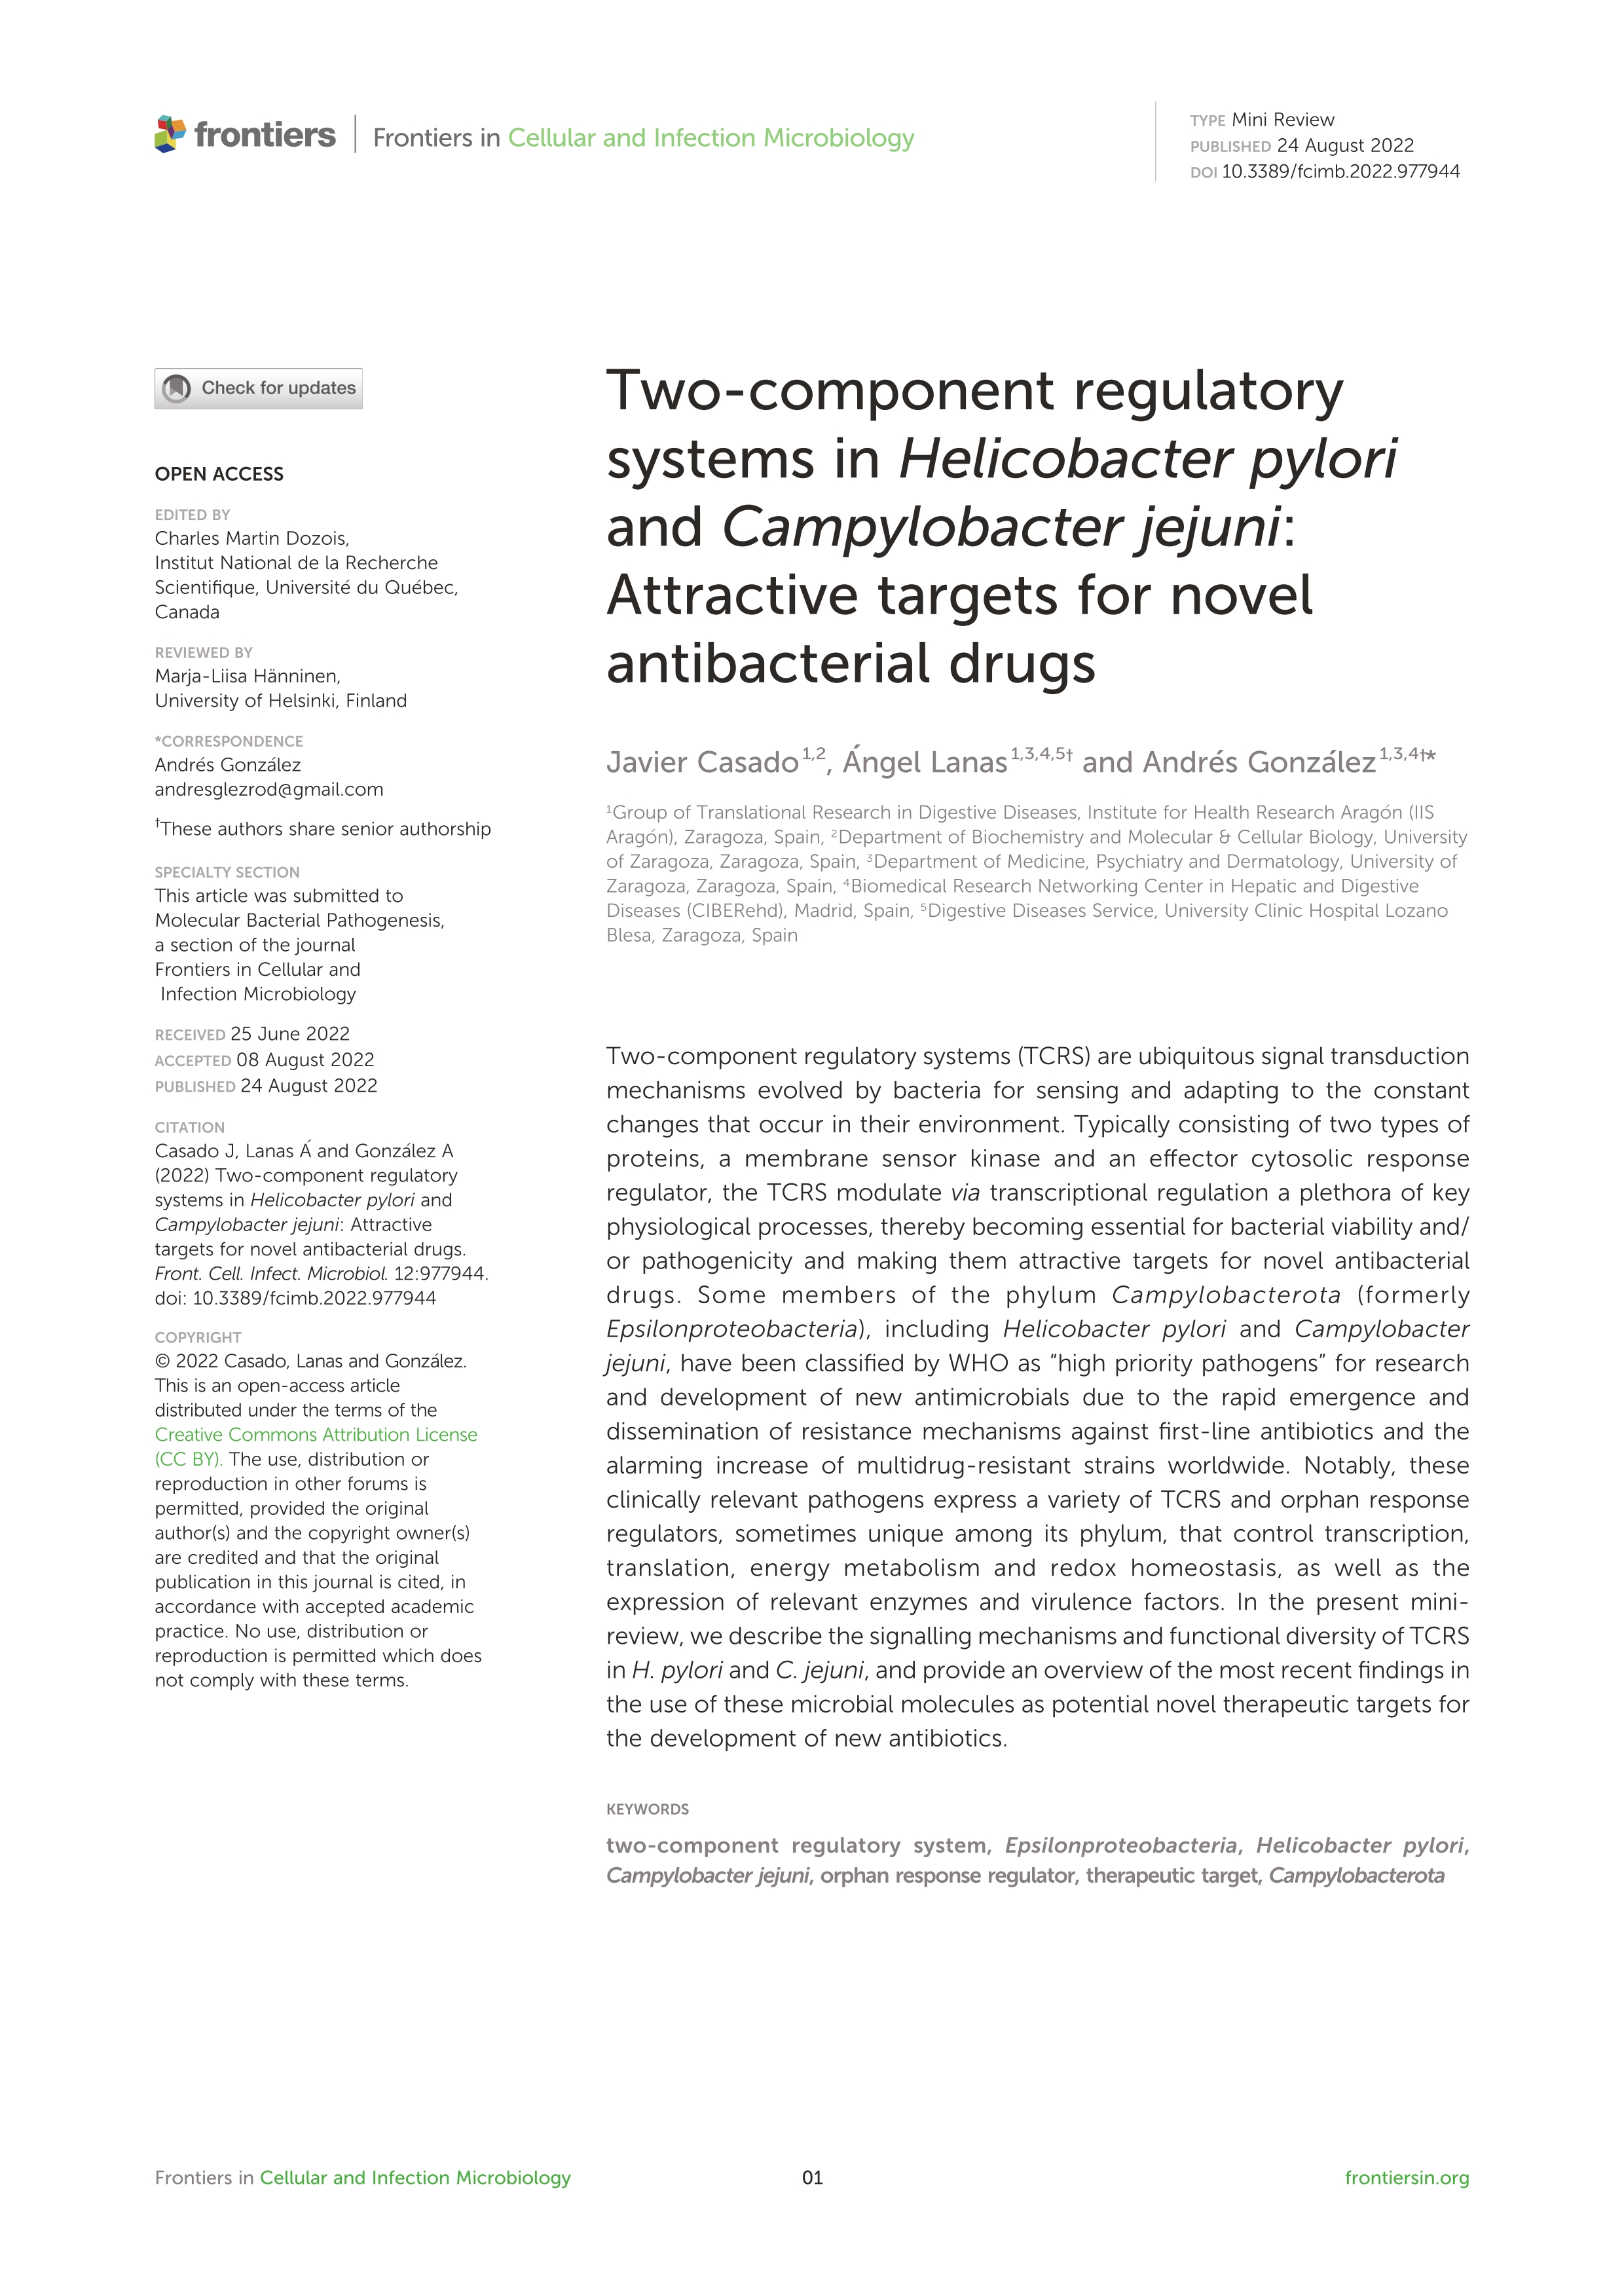 Two-component regulatory systems in Helicobacter pylori and Campylobacter jejuni: attractive targets for novel antibacterial drugs